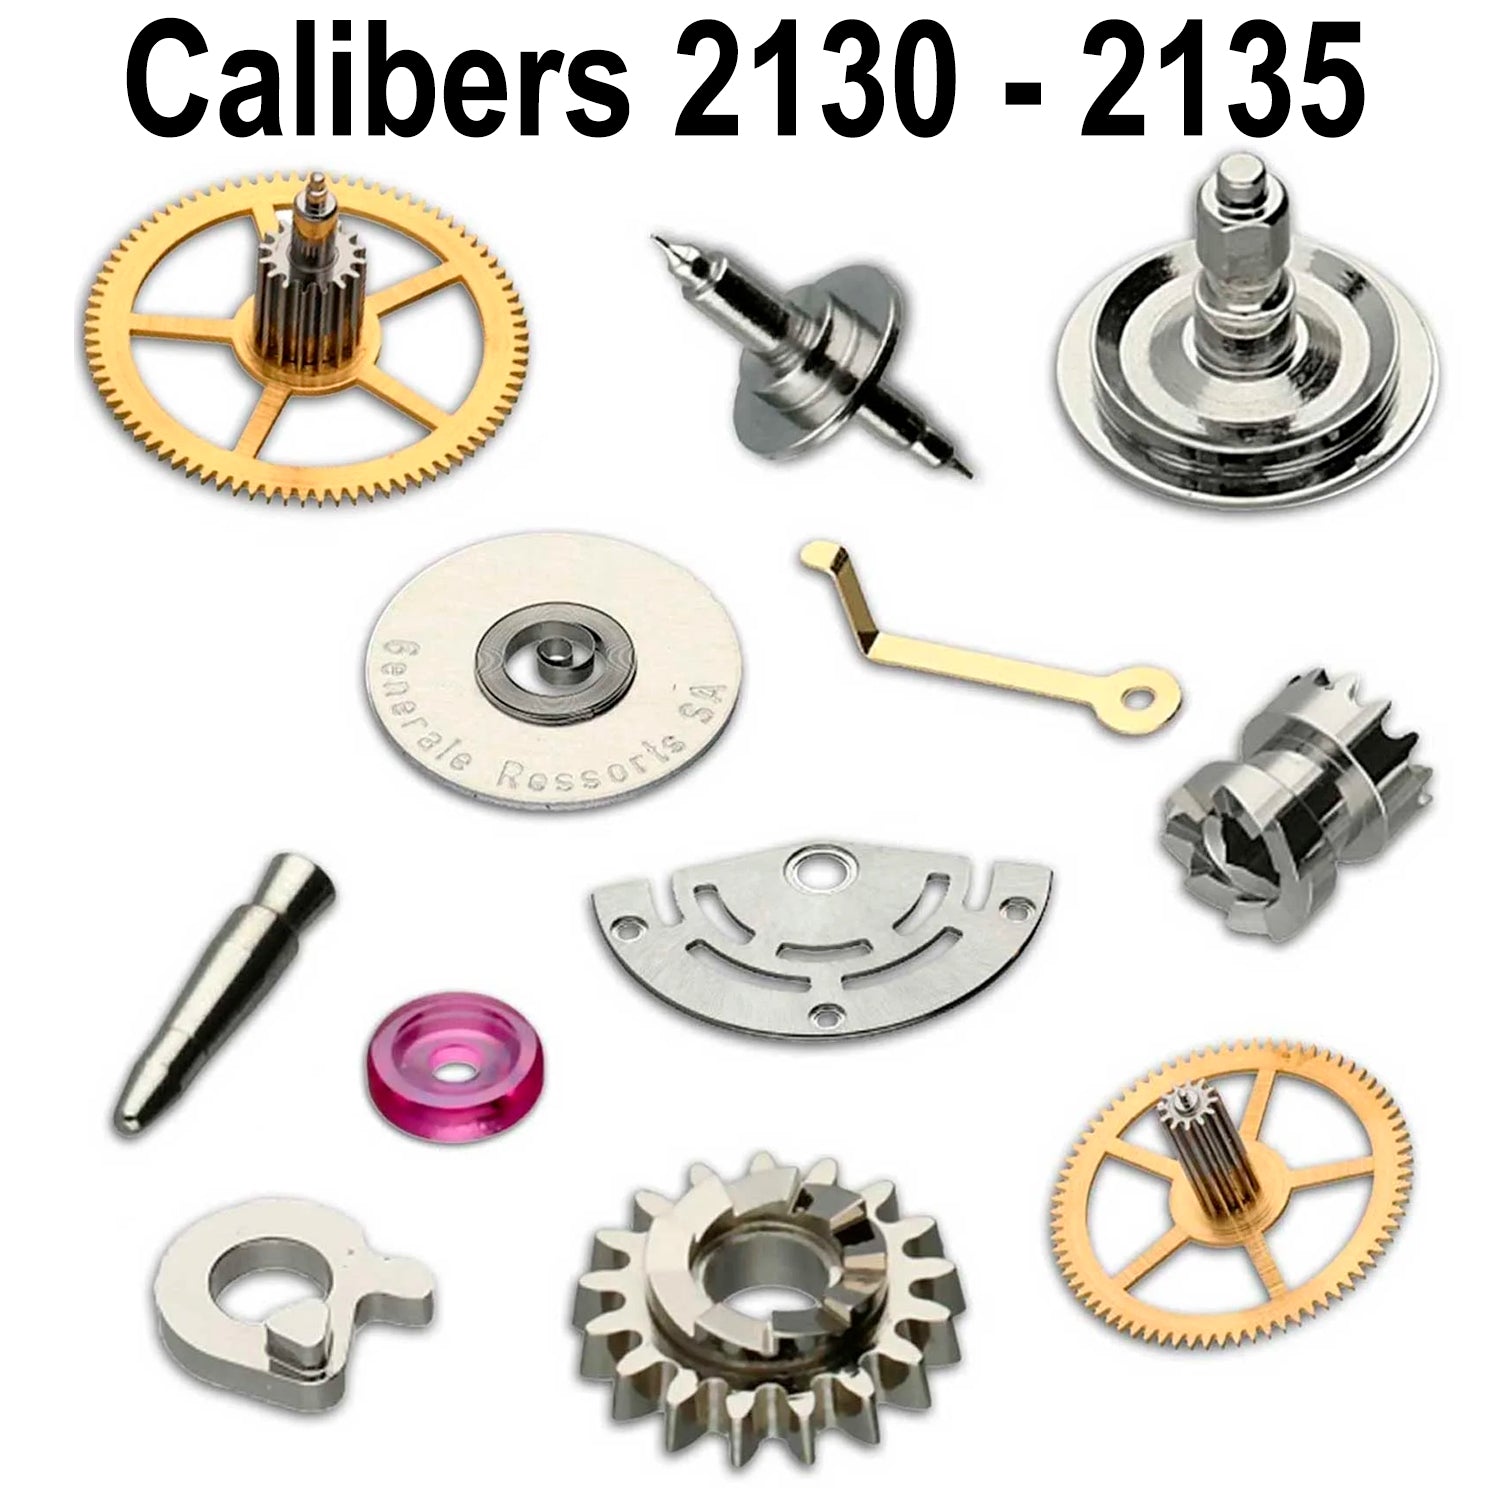 Internal Parts to fit Rolex 21 Series Calibers 2130 - 2135